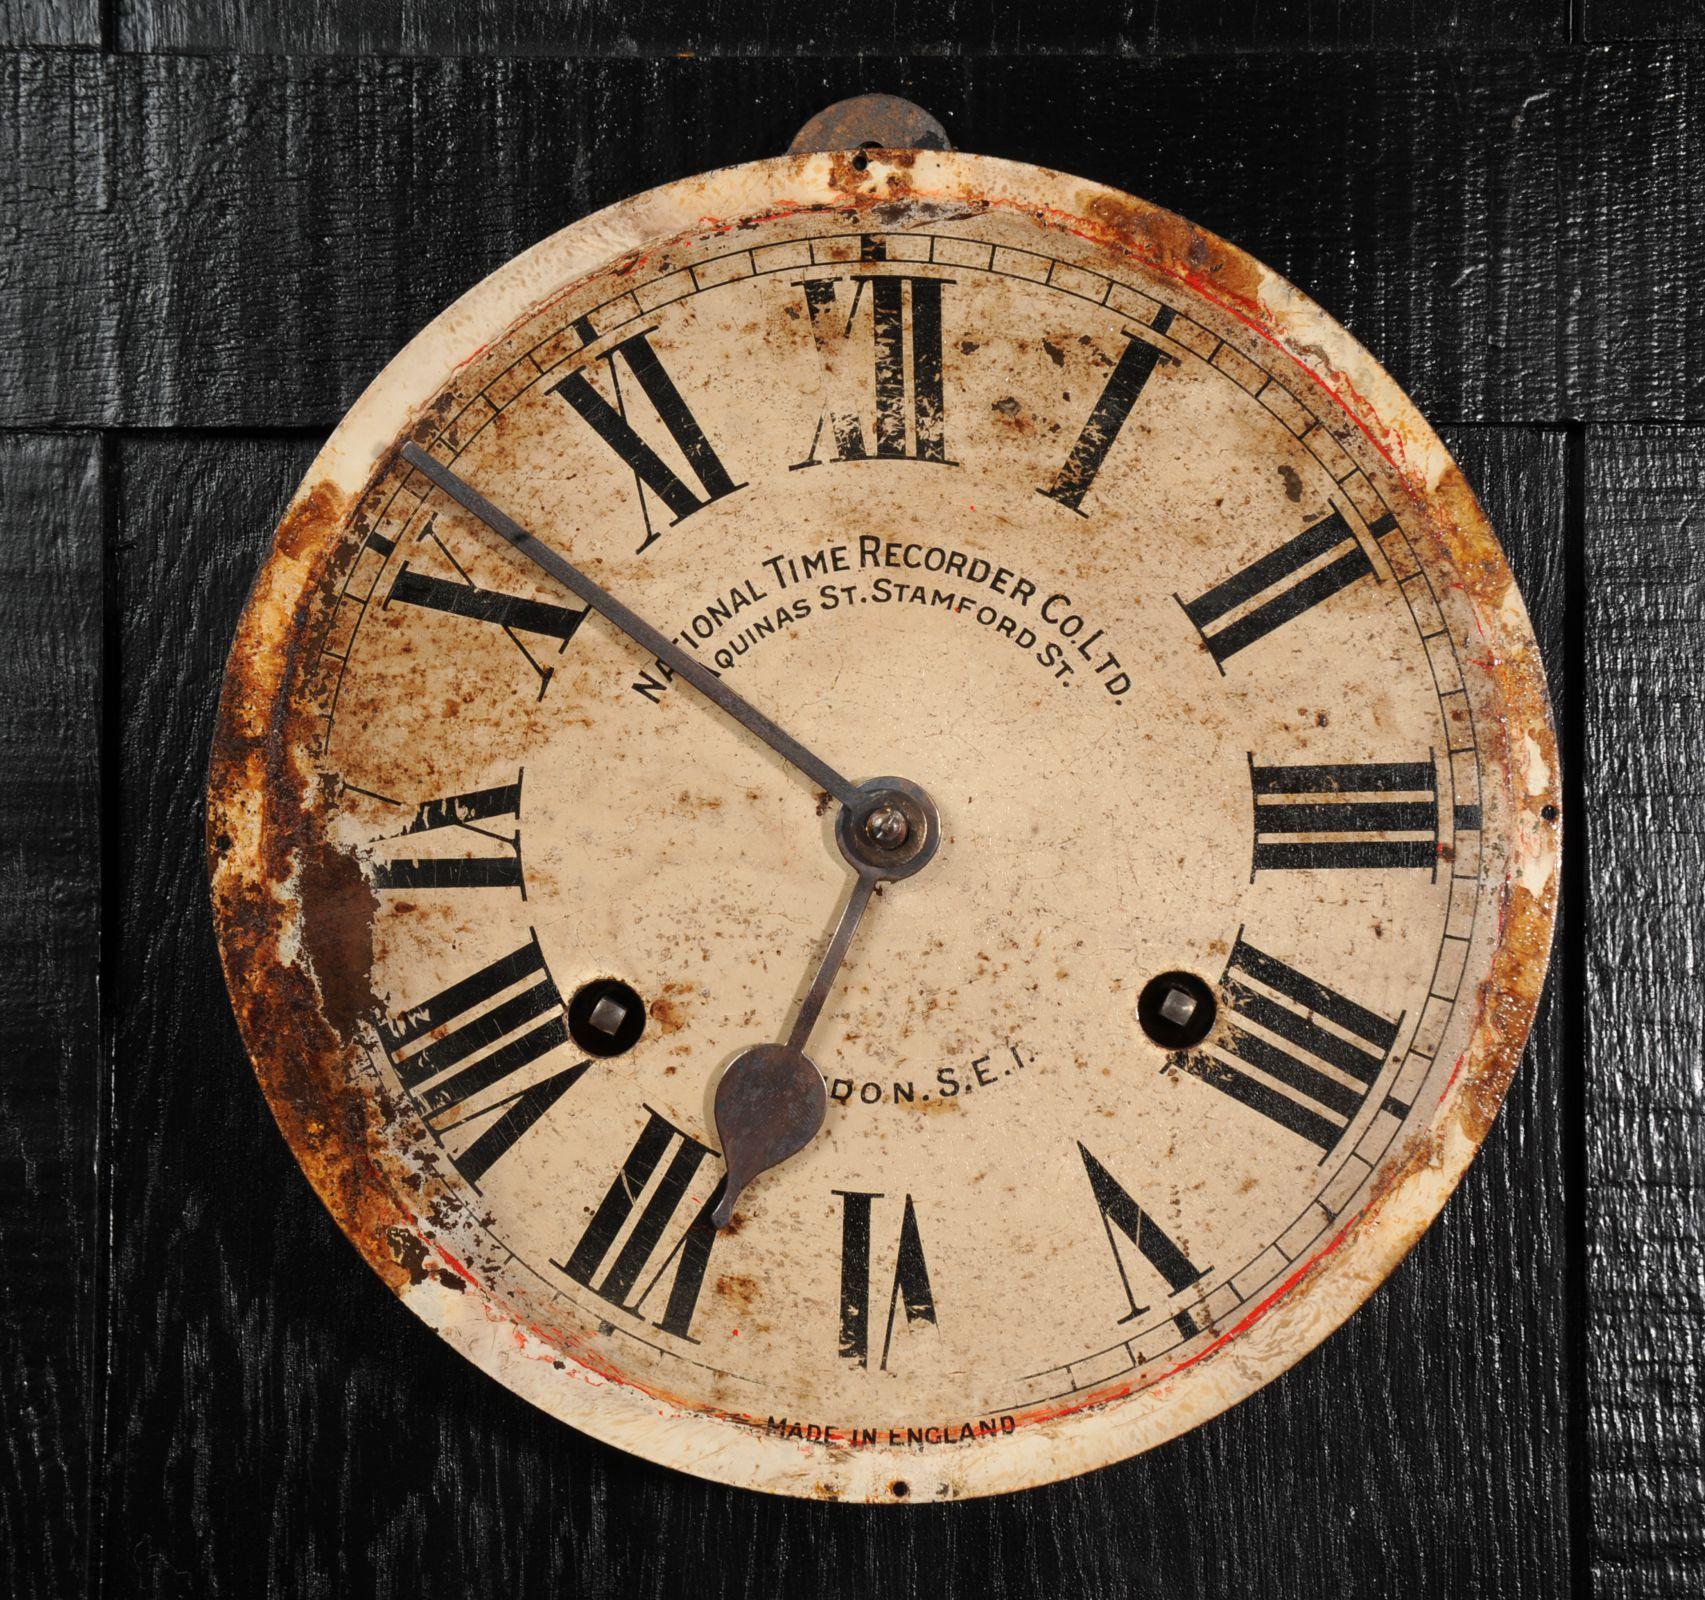 A lovely painted dial by the National Time Recorder Co Ltd of London. Recovered from a derelict industrial building it has scars of its hard working life with glorious original flaky paint, old over-paint, varnish and old rust. Bearing witness to